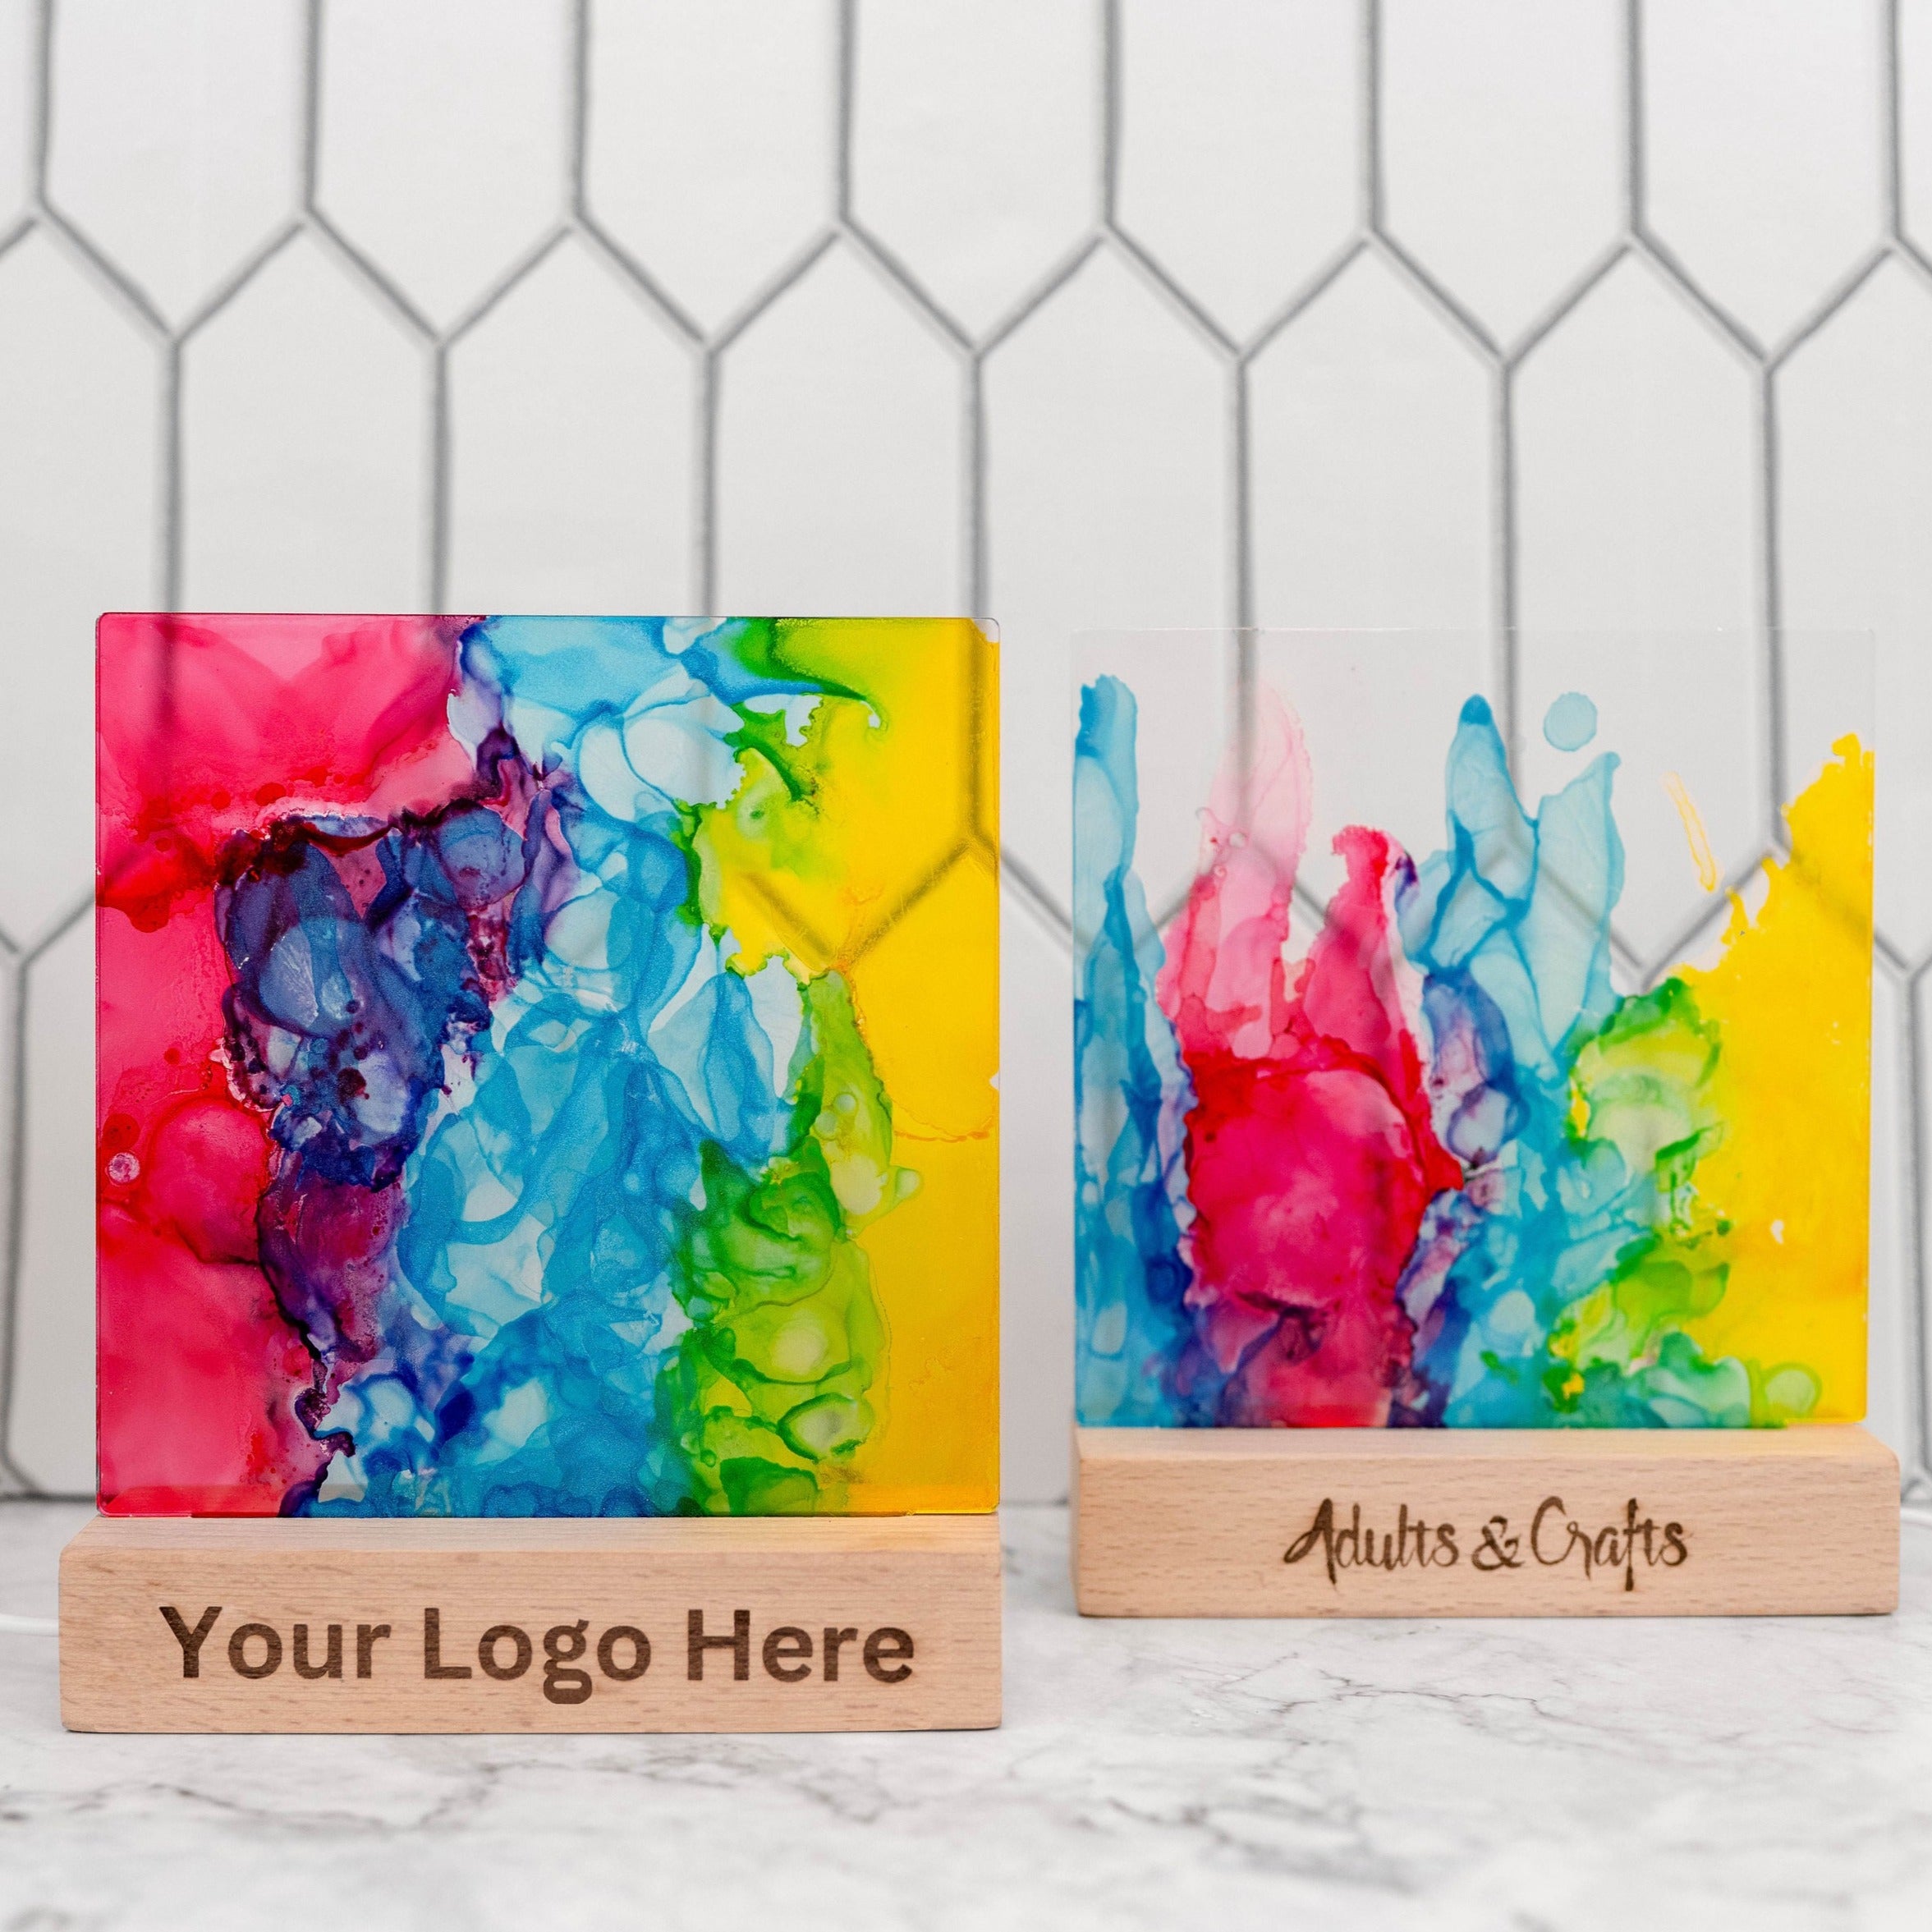 LED Alcohol Ink Corporate Gift Kit